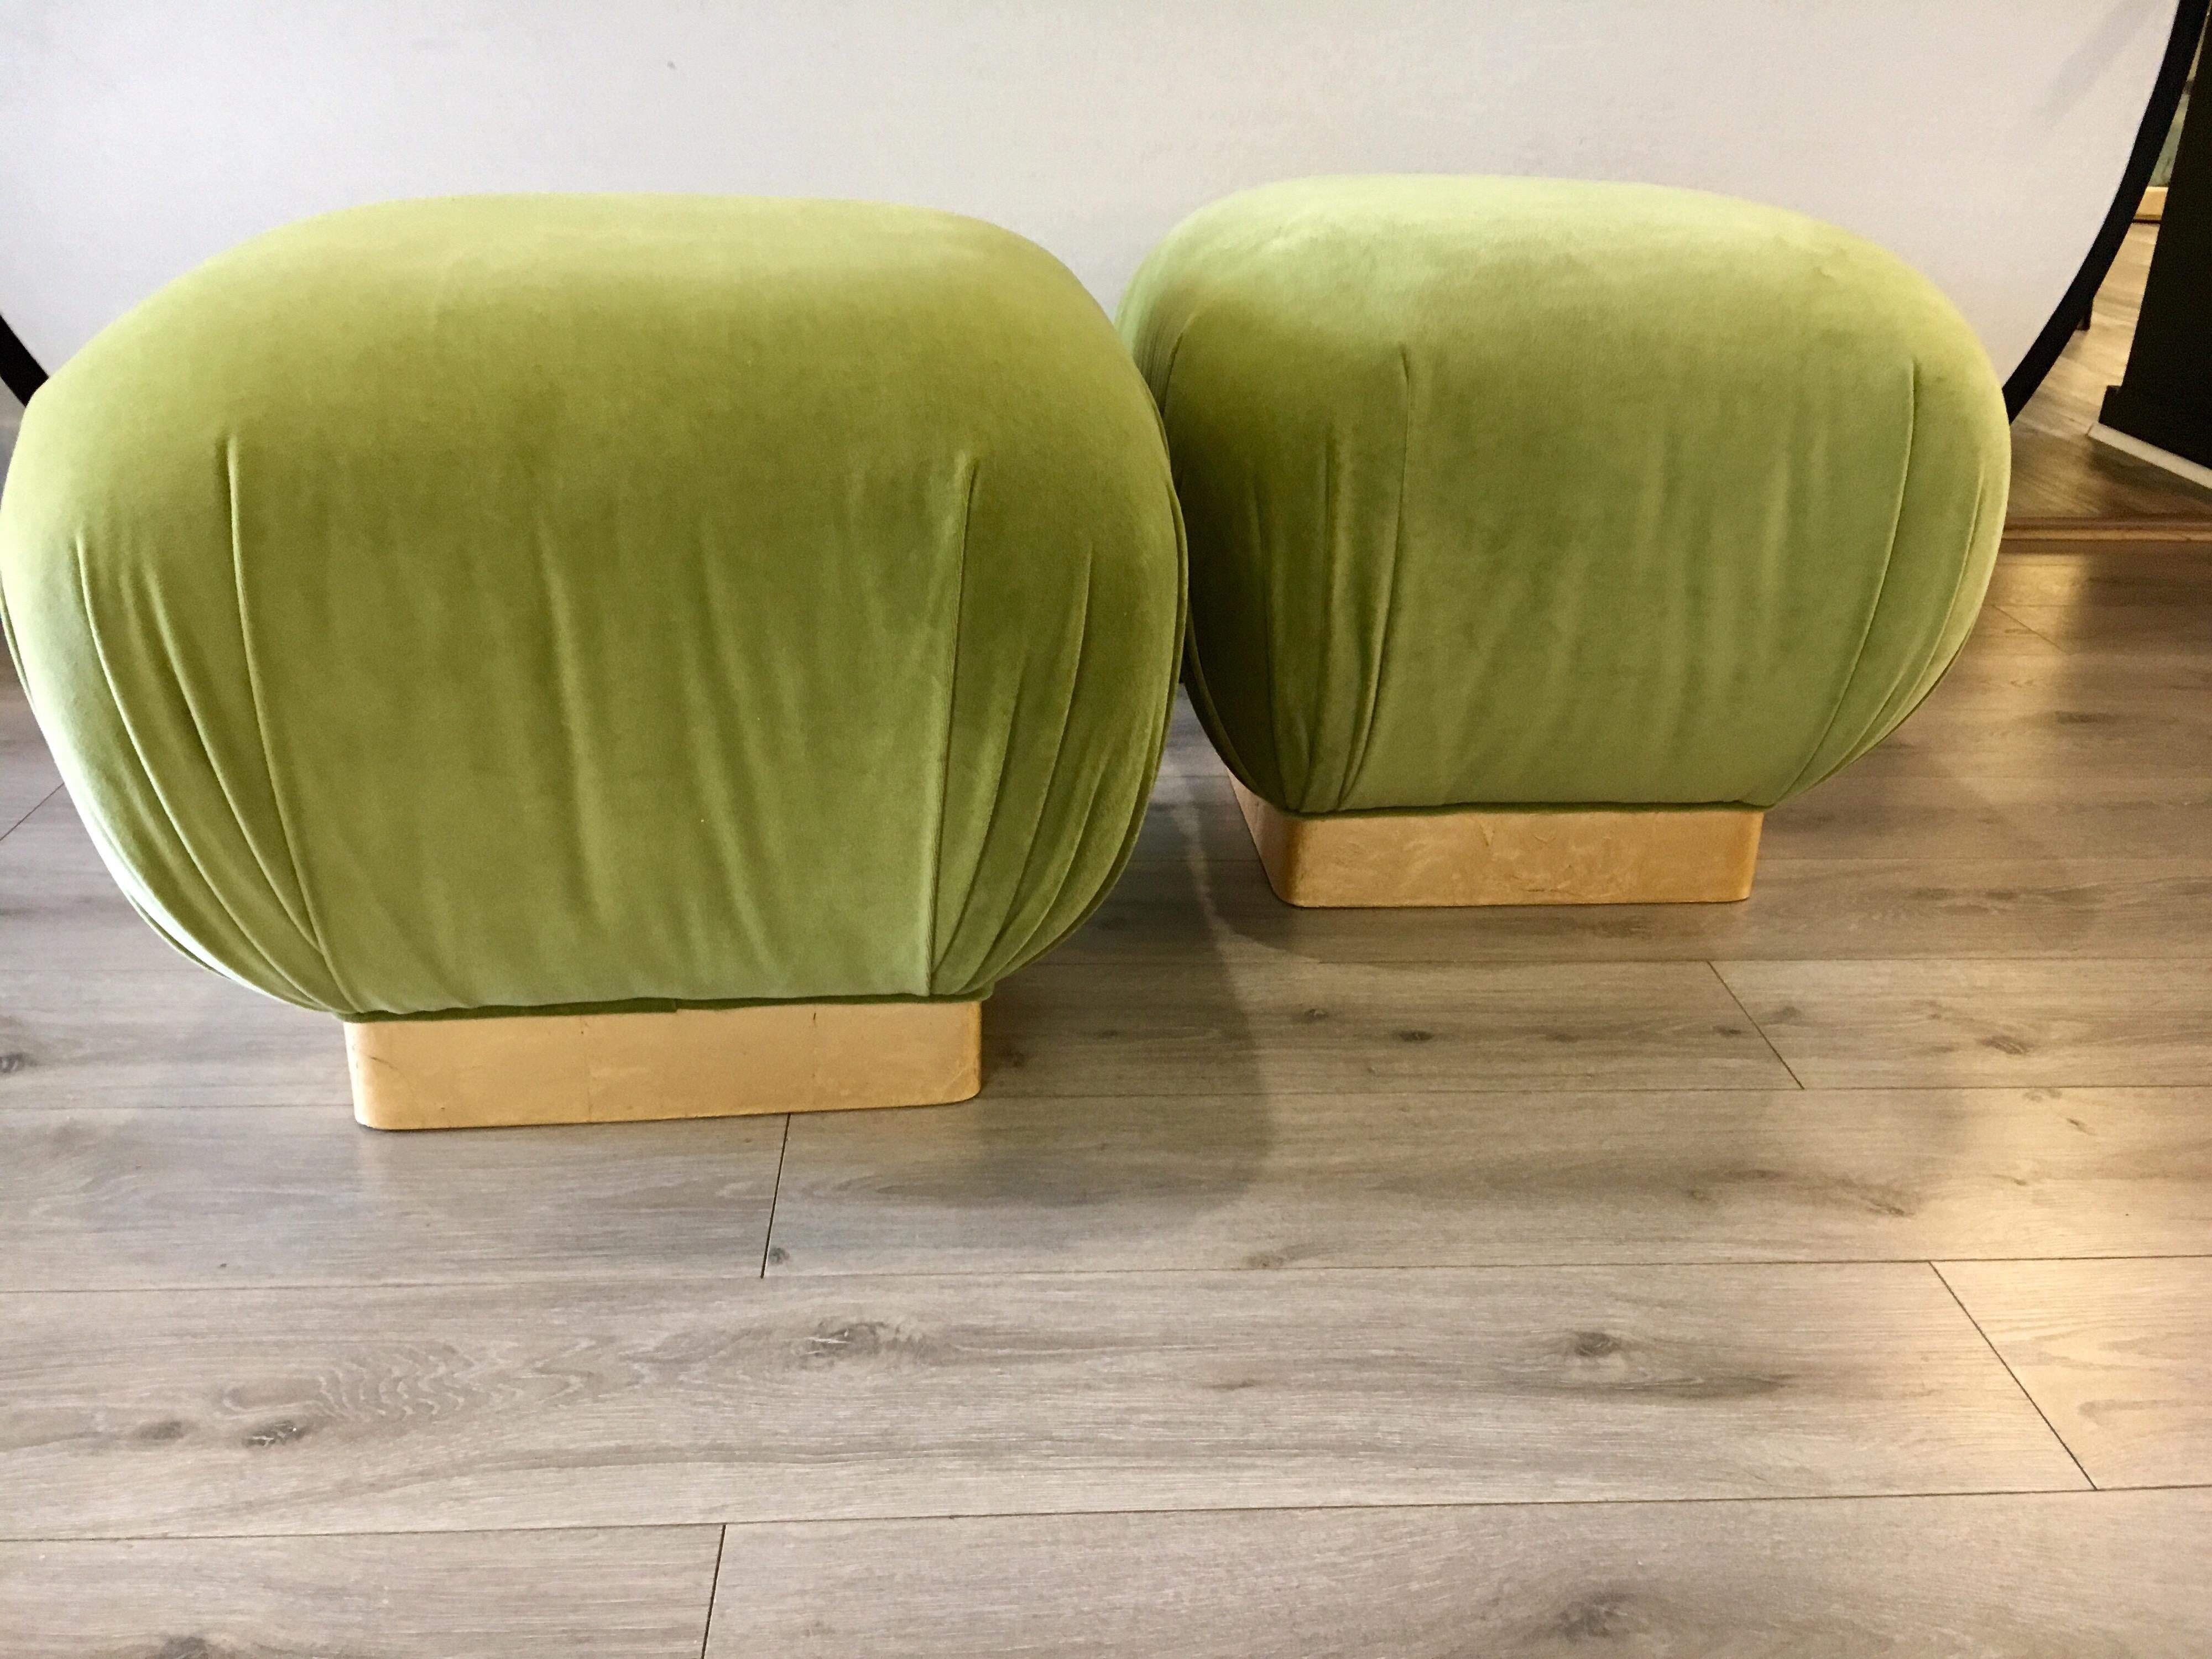 Great looking pair of matching poufs with Milo Baughman style brass banding at bottom. The shade of green on the fabric is vibrant and vivid.